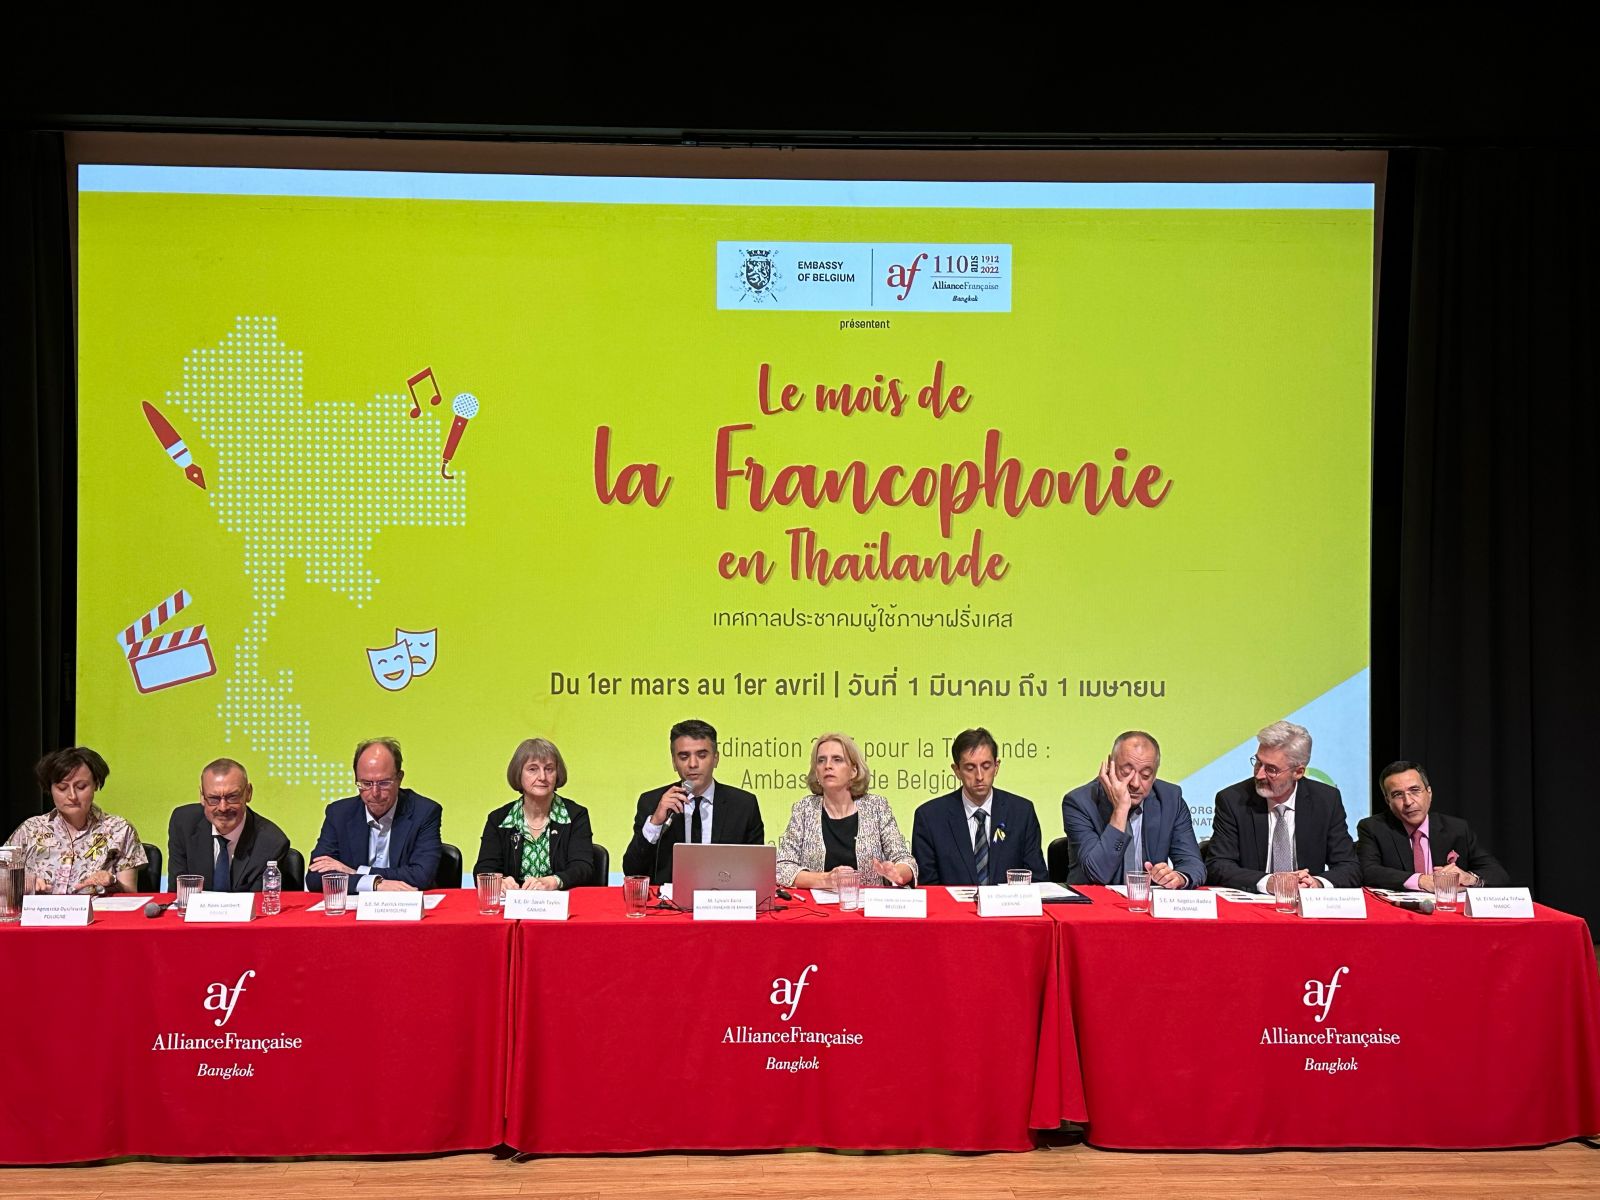 La Francophonie to be Celebrated throughout March in Thailand